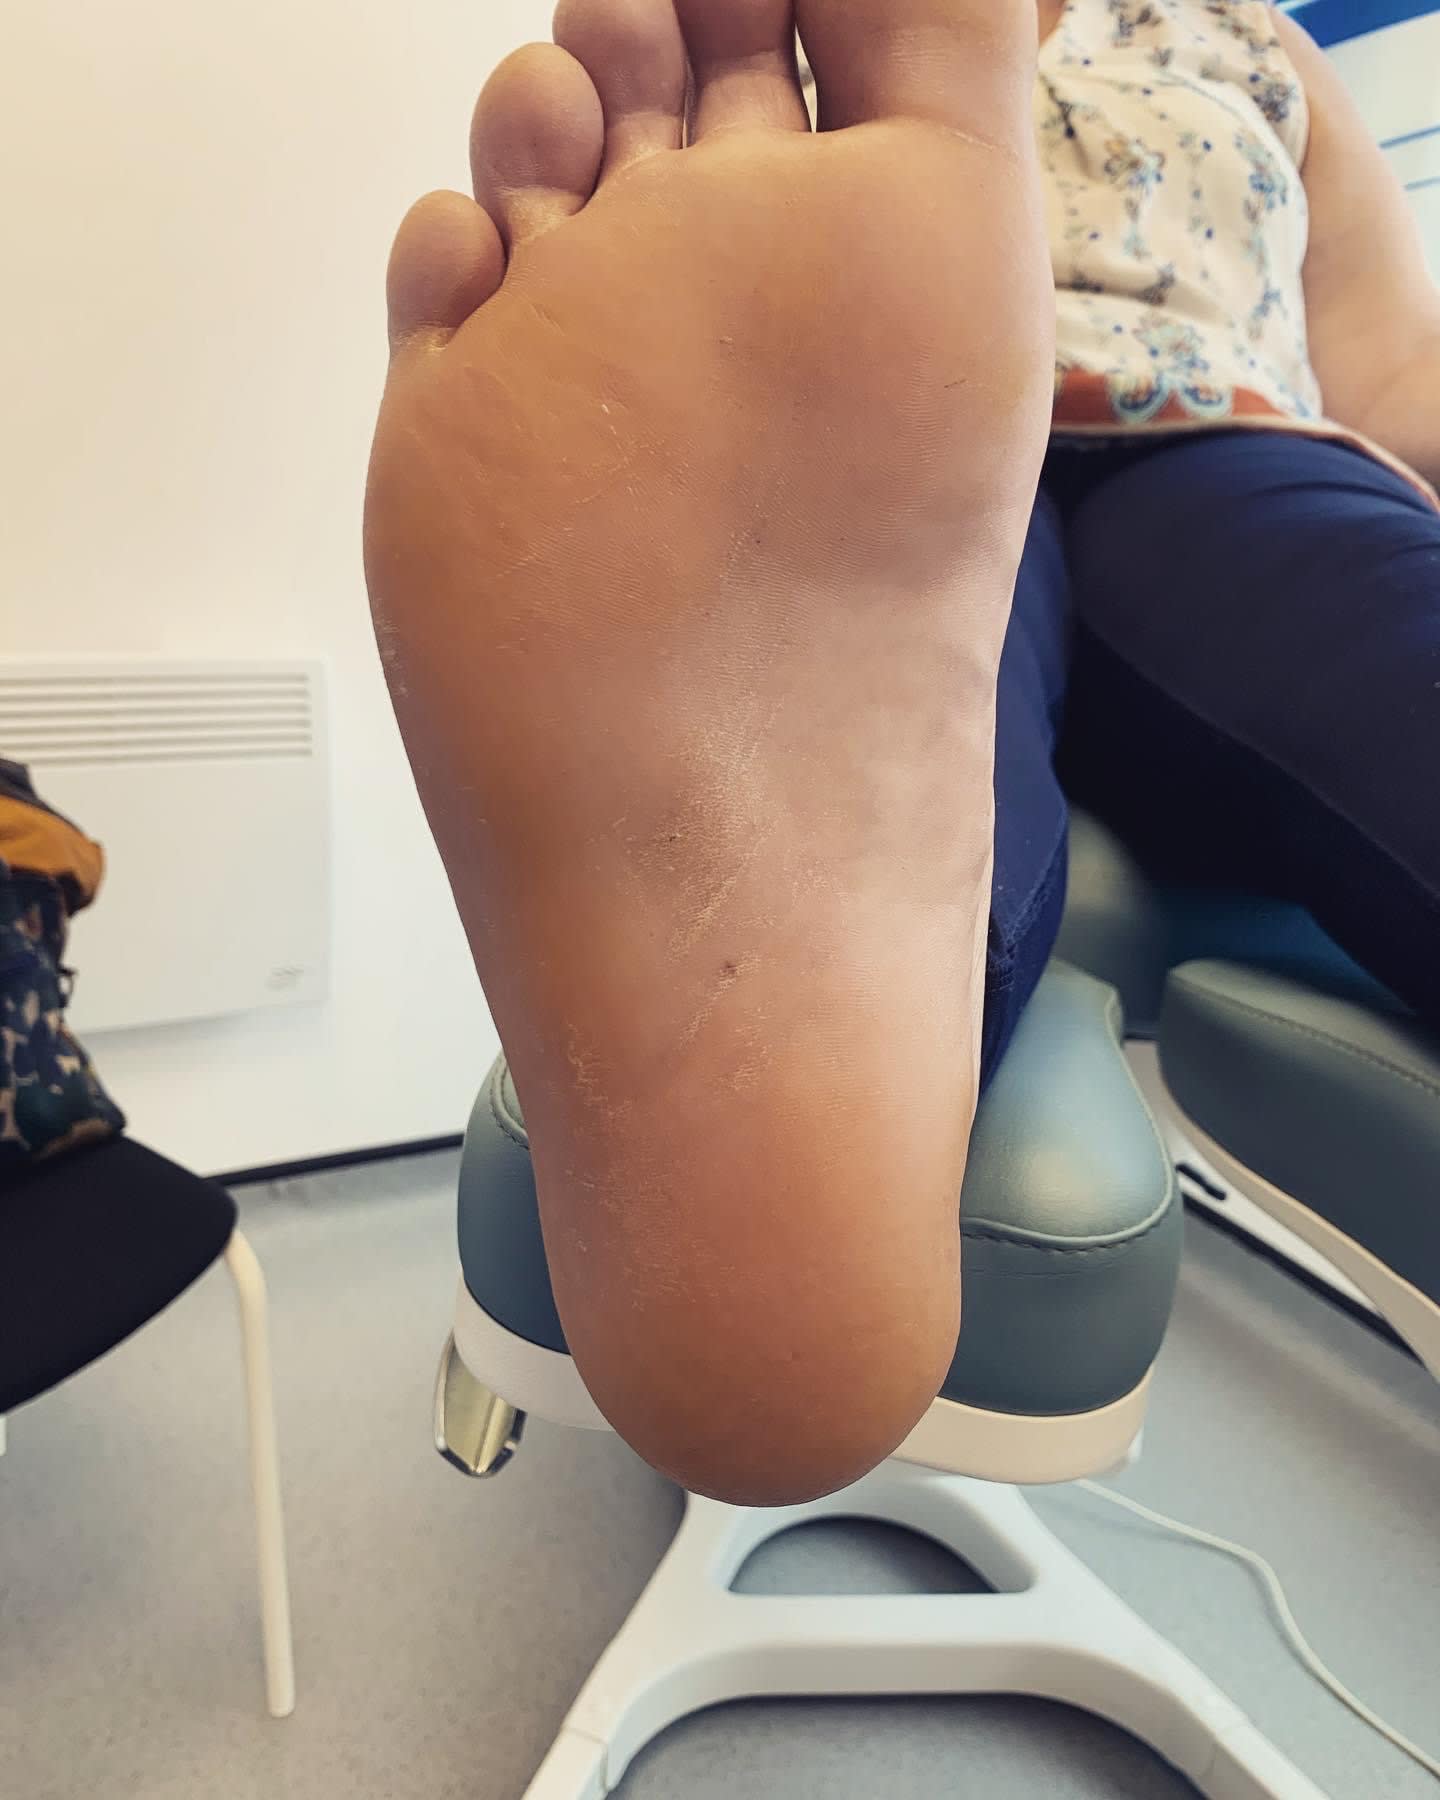 Images DR Podiatry & Chiropody Services